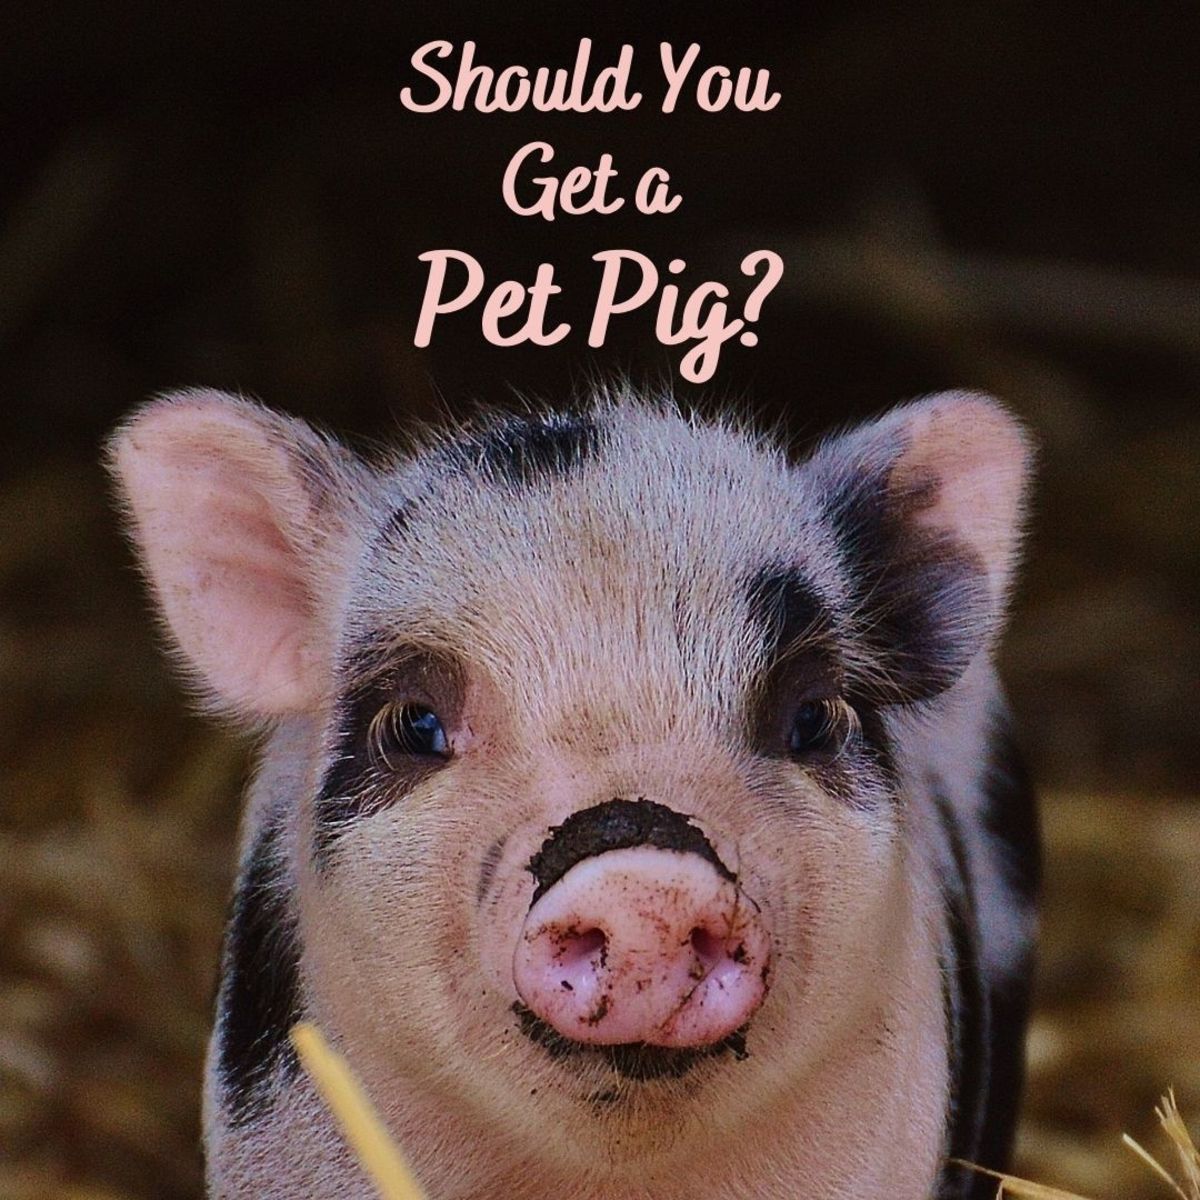 How to Decide if a Pet Pig Is Right for You